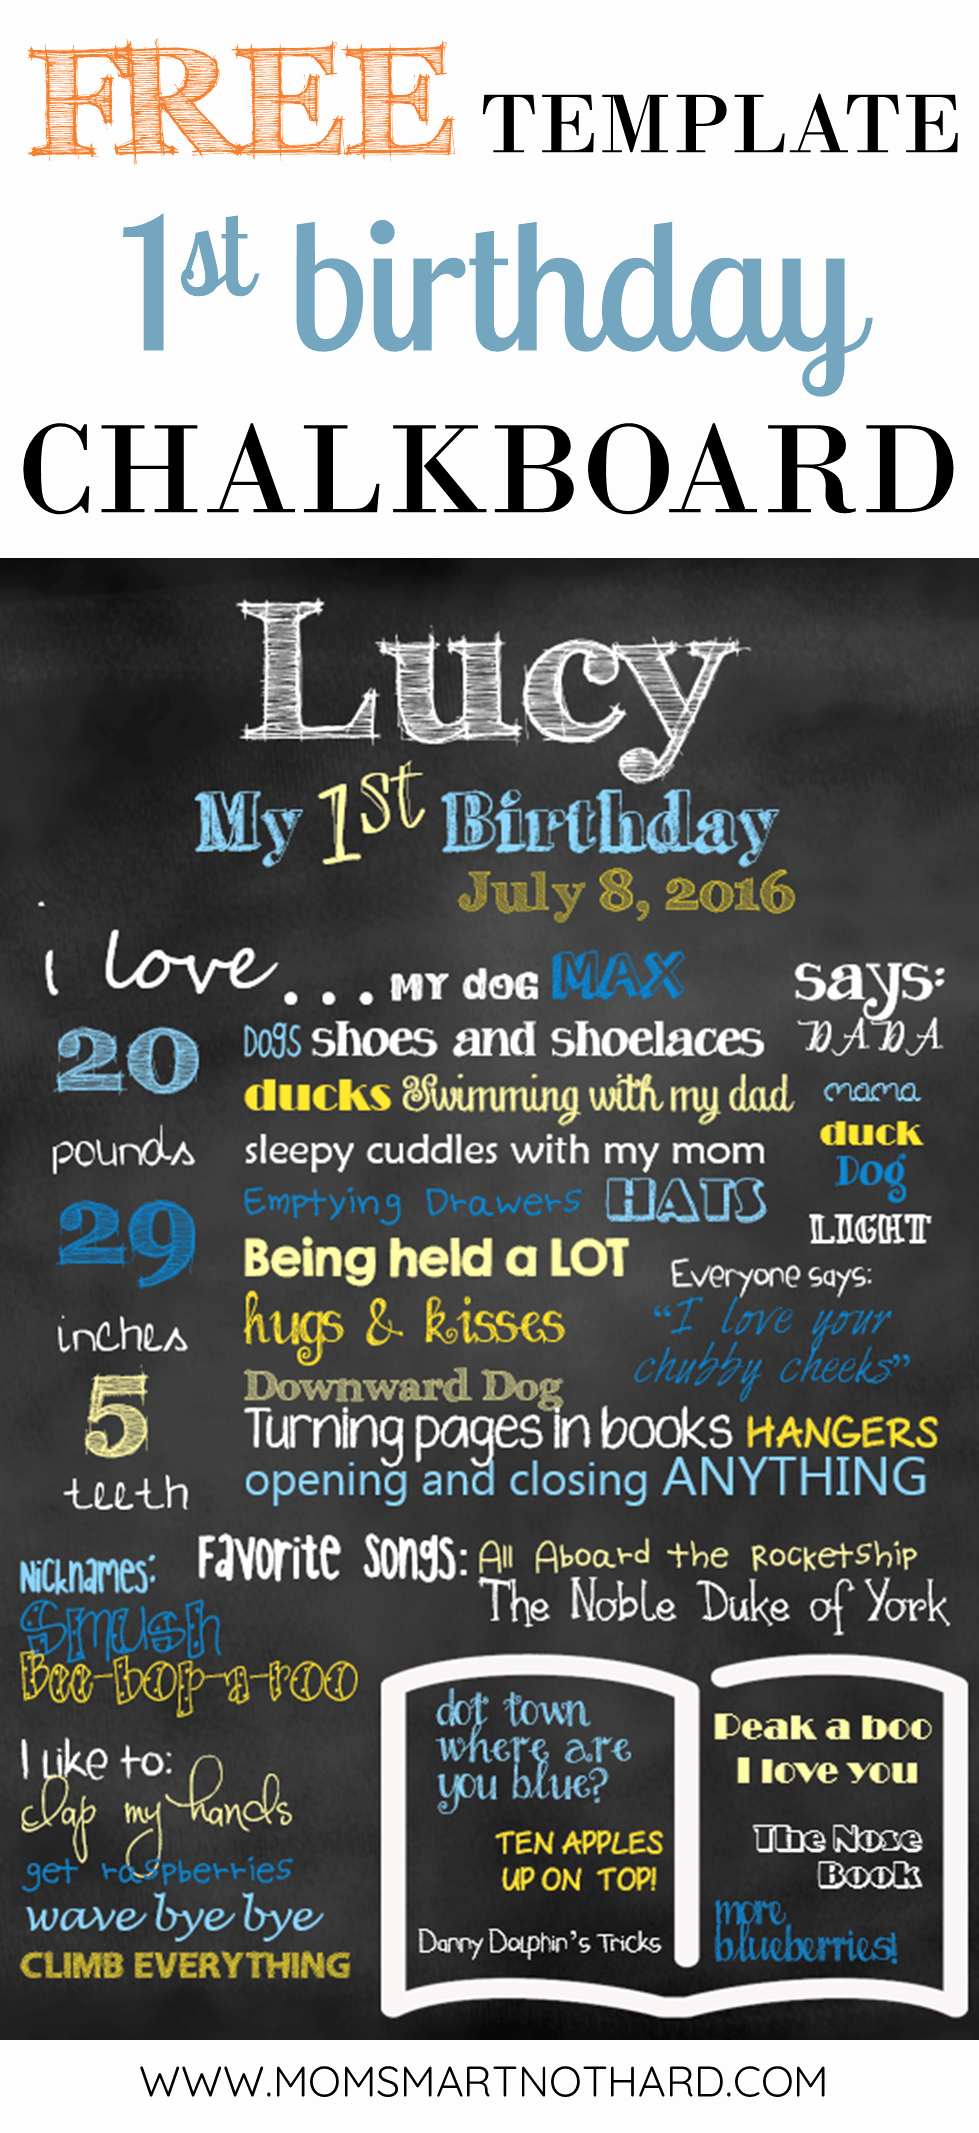 Free Birthday Chalkboard Template Lovely First Birthday Chalkboard Template Free Download for Baby